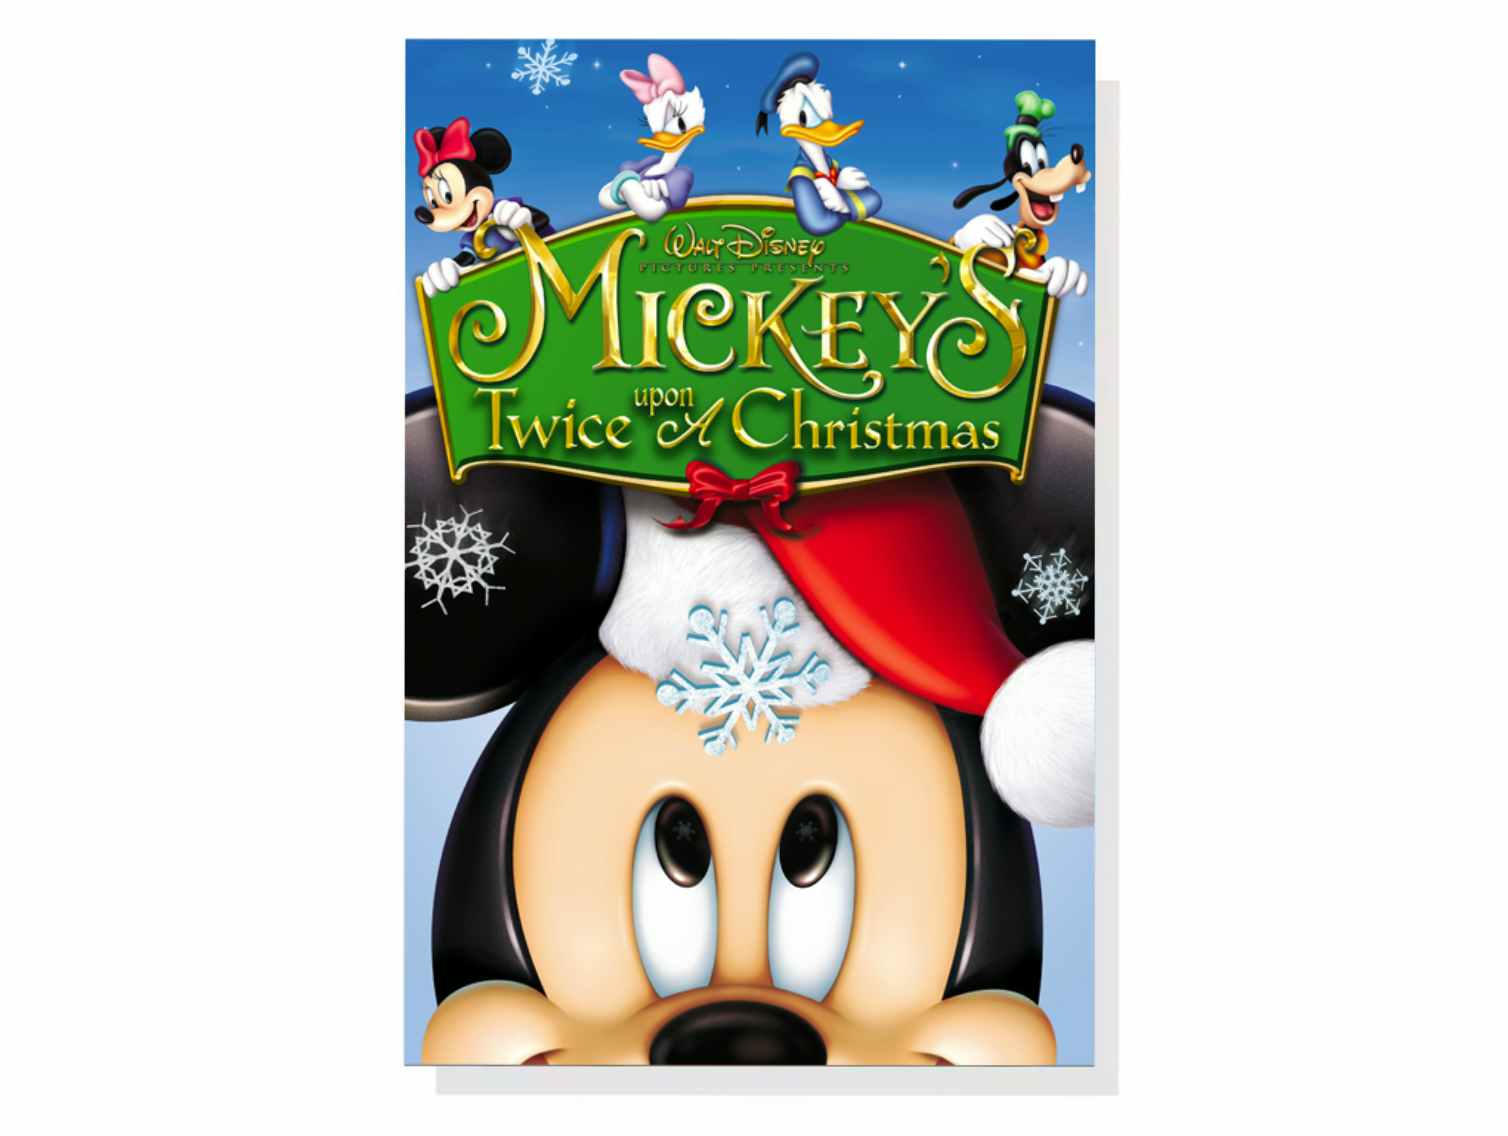 Movie poster for Mickey's Twice Upon a Christmas, one of the best Christmas movies on Disney Plus.